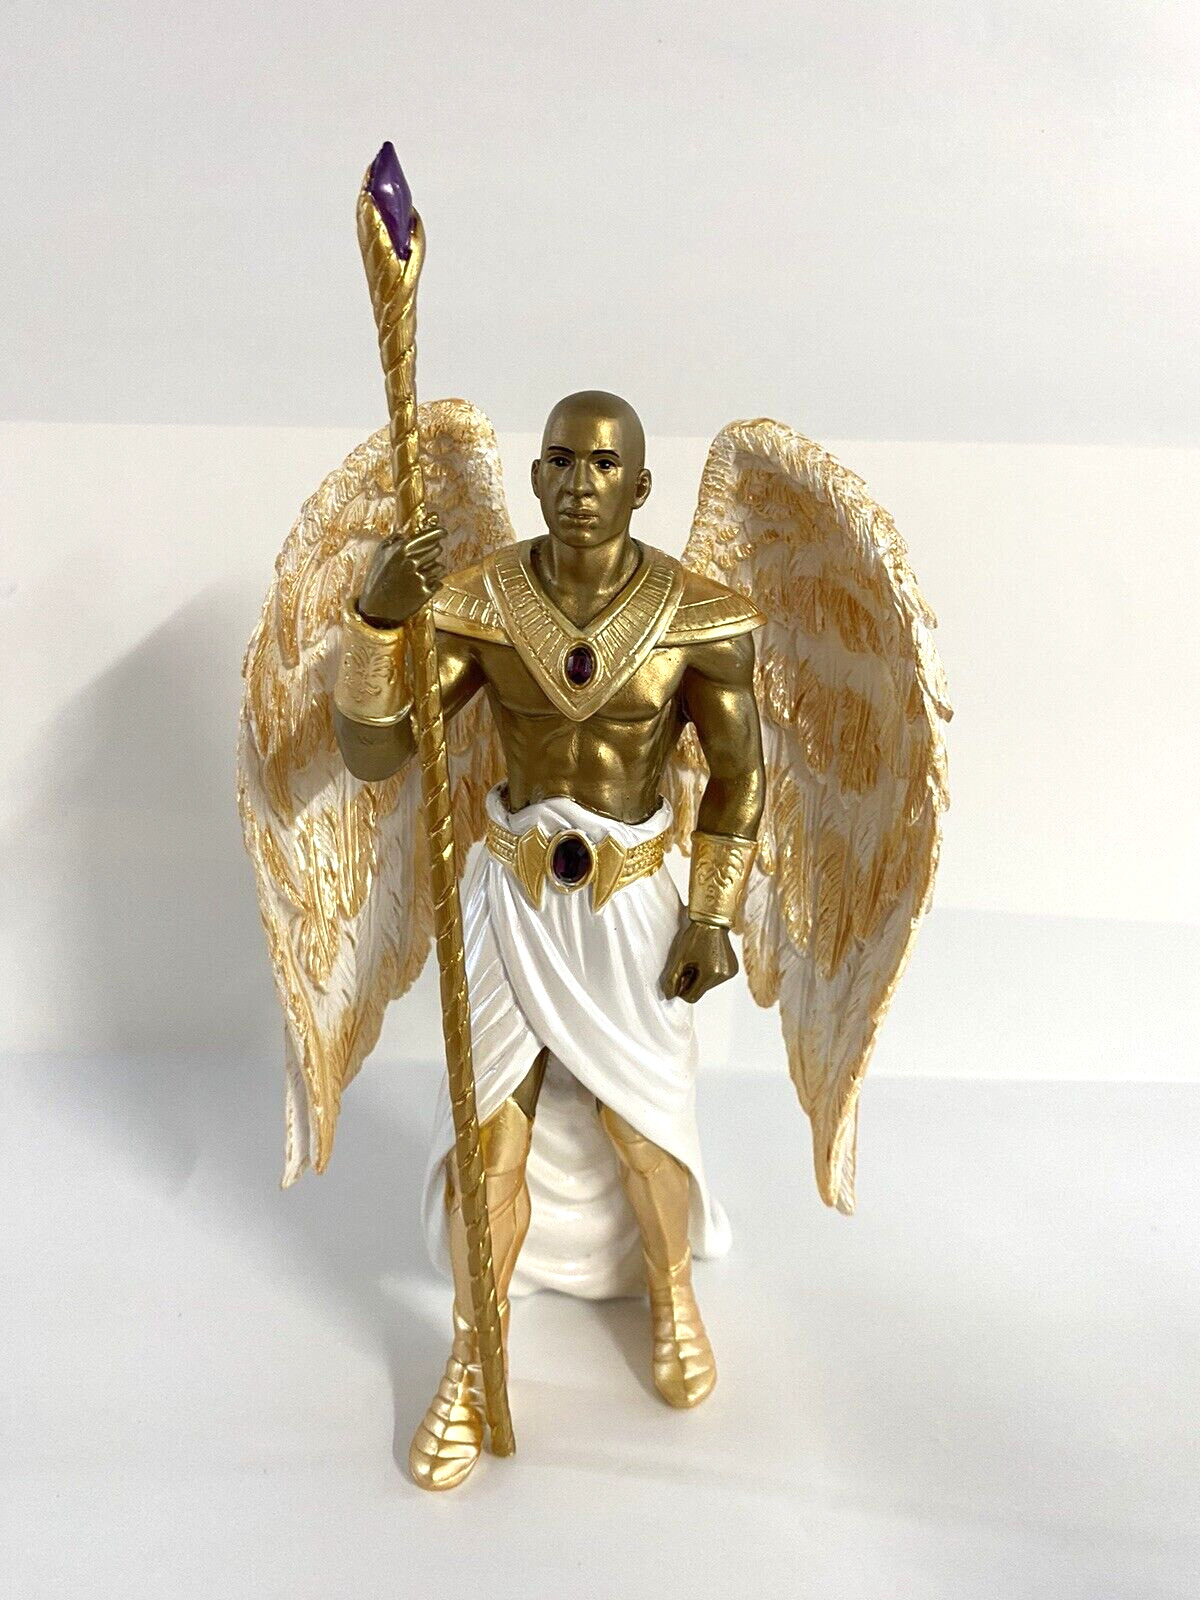 Guardian Angel Keith Mallett Collection Figurine Wisdom The Amethyst Empowering